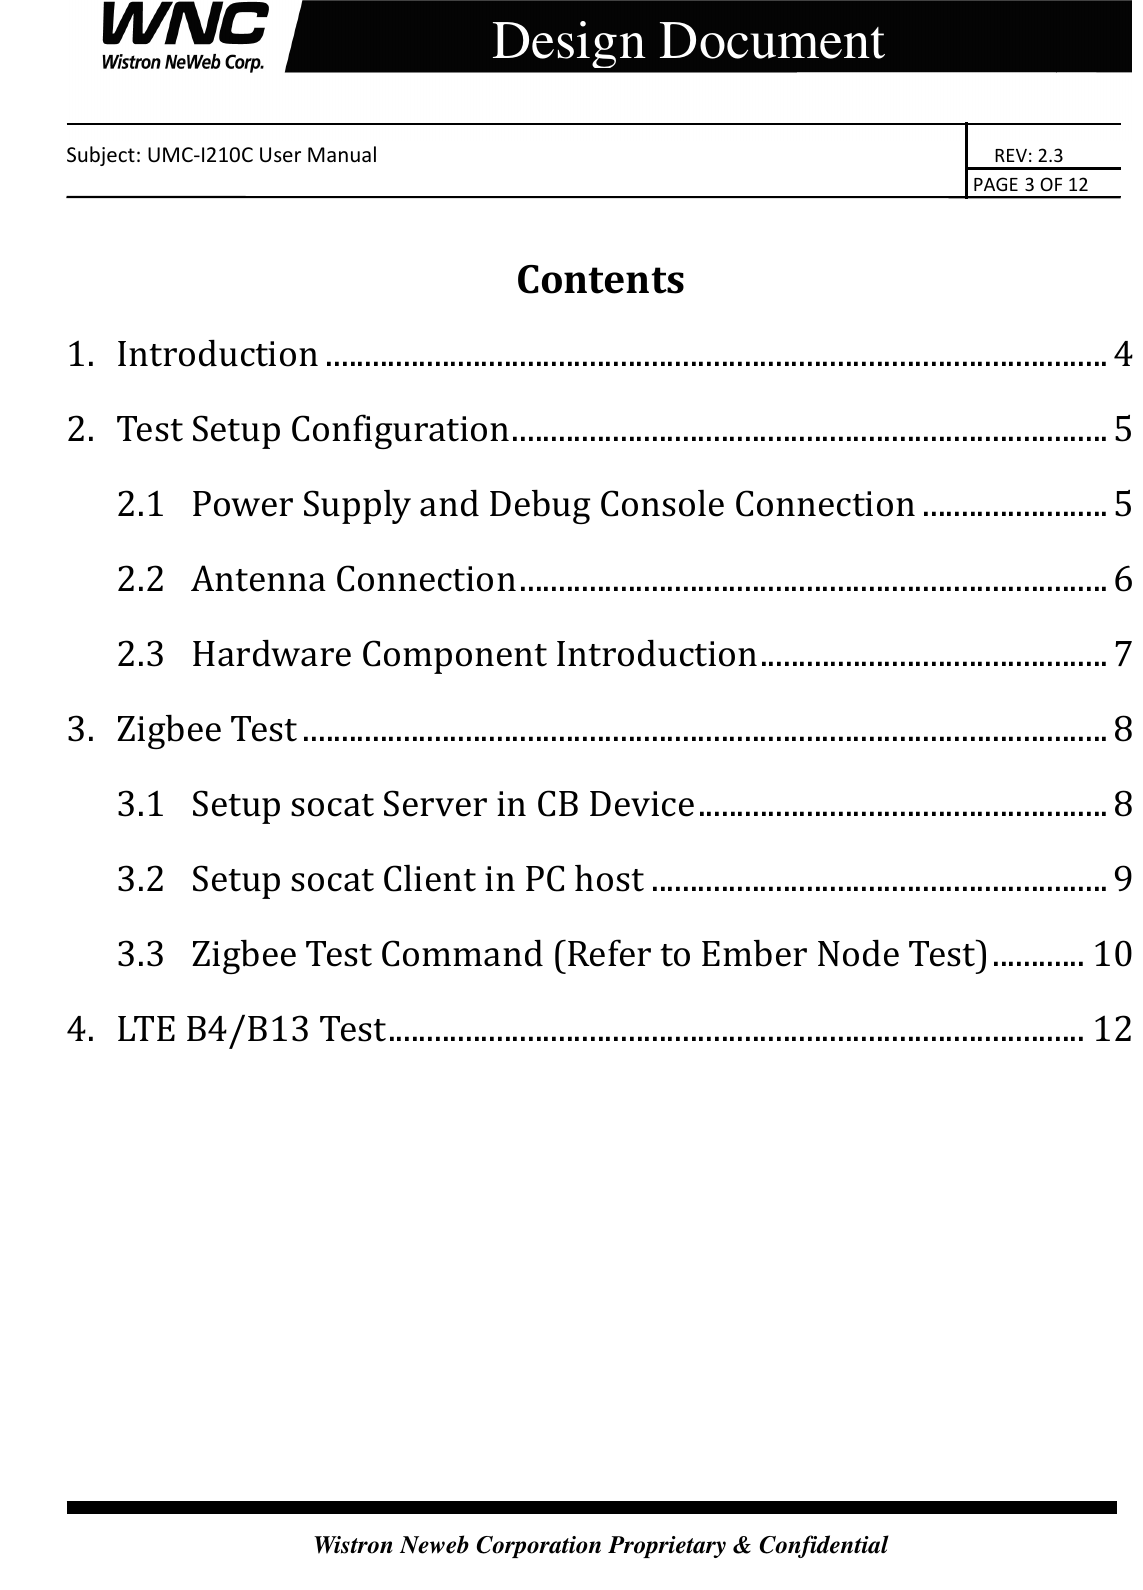    Subject: UMC-I210C User Manual                                                                       REV: 2.3                                                                                                                                                                               PAGE 3 OF 12  Wistron Neweb Corporation Proprietary &amp; Confidential     Design Document  Contents 1.  Introduction ..................................................................................................... 4 2.  Test Setup Configuration ............................................................................. 5 2.1  Power Supply and Debug Console Connection ........................ 5 2.2  Antenna Connection ............................................................................ 6 2.3  Hardware Component Introduction ............................................. 7 3.  Zigbee Test ........................................................................................................ 8 3.1  Setup socat Server in CB Device ..................................................... 8 3.2  Setup socat Client in PC host ........................................................... 9 3.3  Zigbee Test Command (Refer to Ember Node Test) ............ 10 4.  LTE B4/B13 Test .......................................................................................... 12       